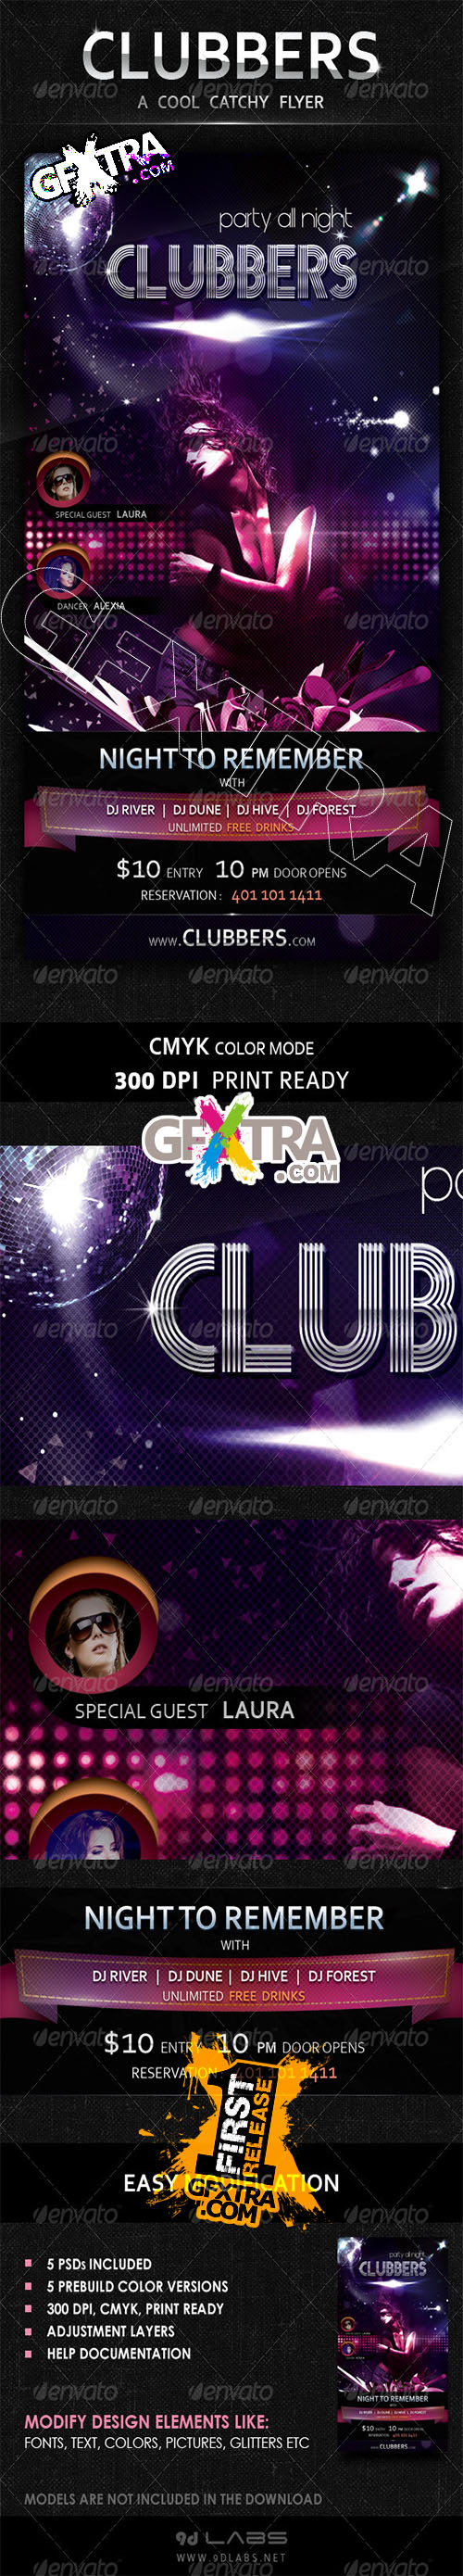 GraphicRiver - Clubbers - A Cool Catchy Flyer - CMYK 300 DPI